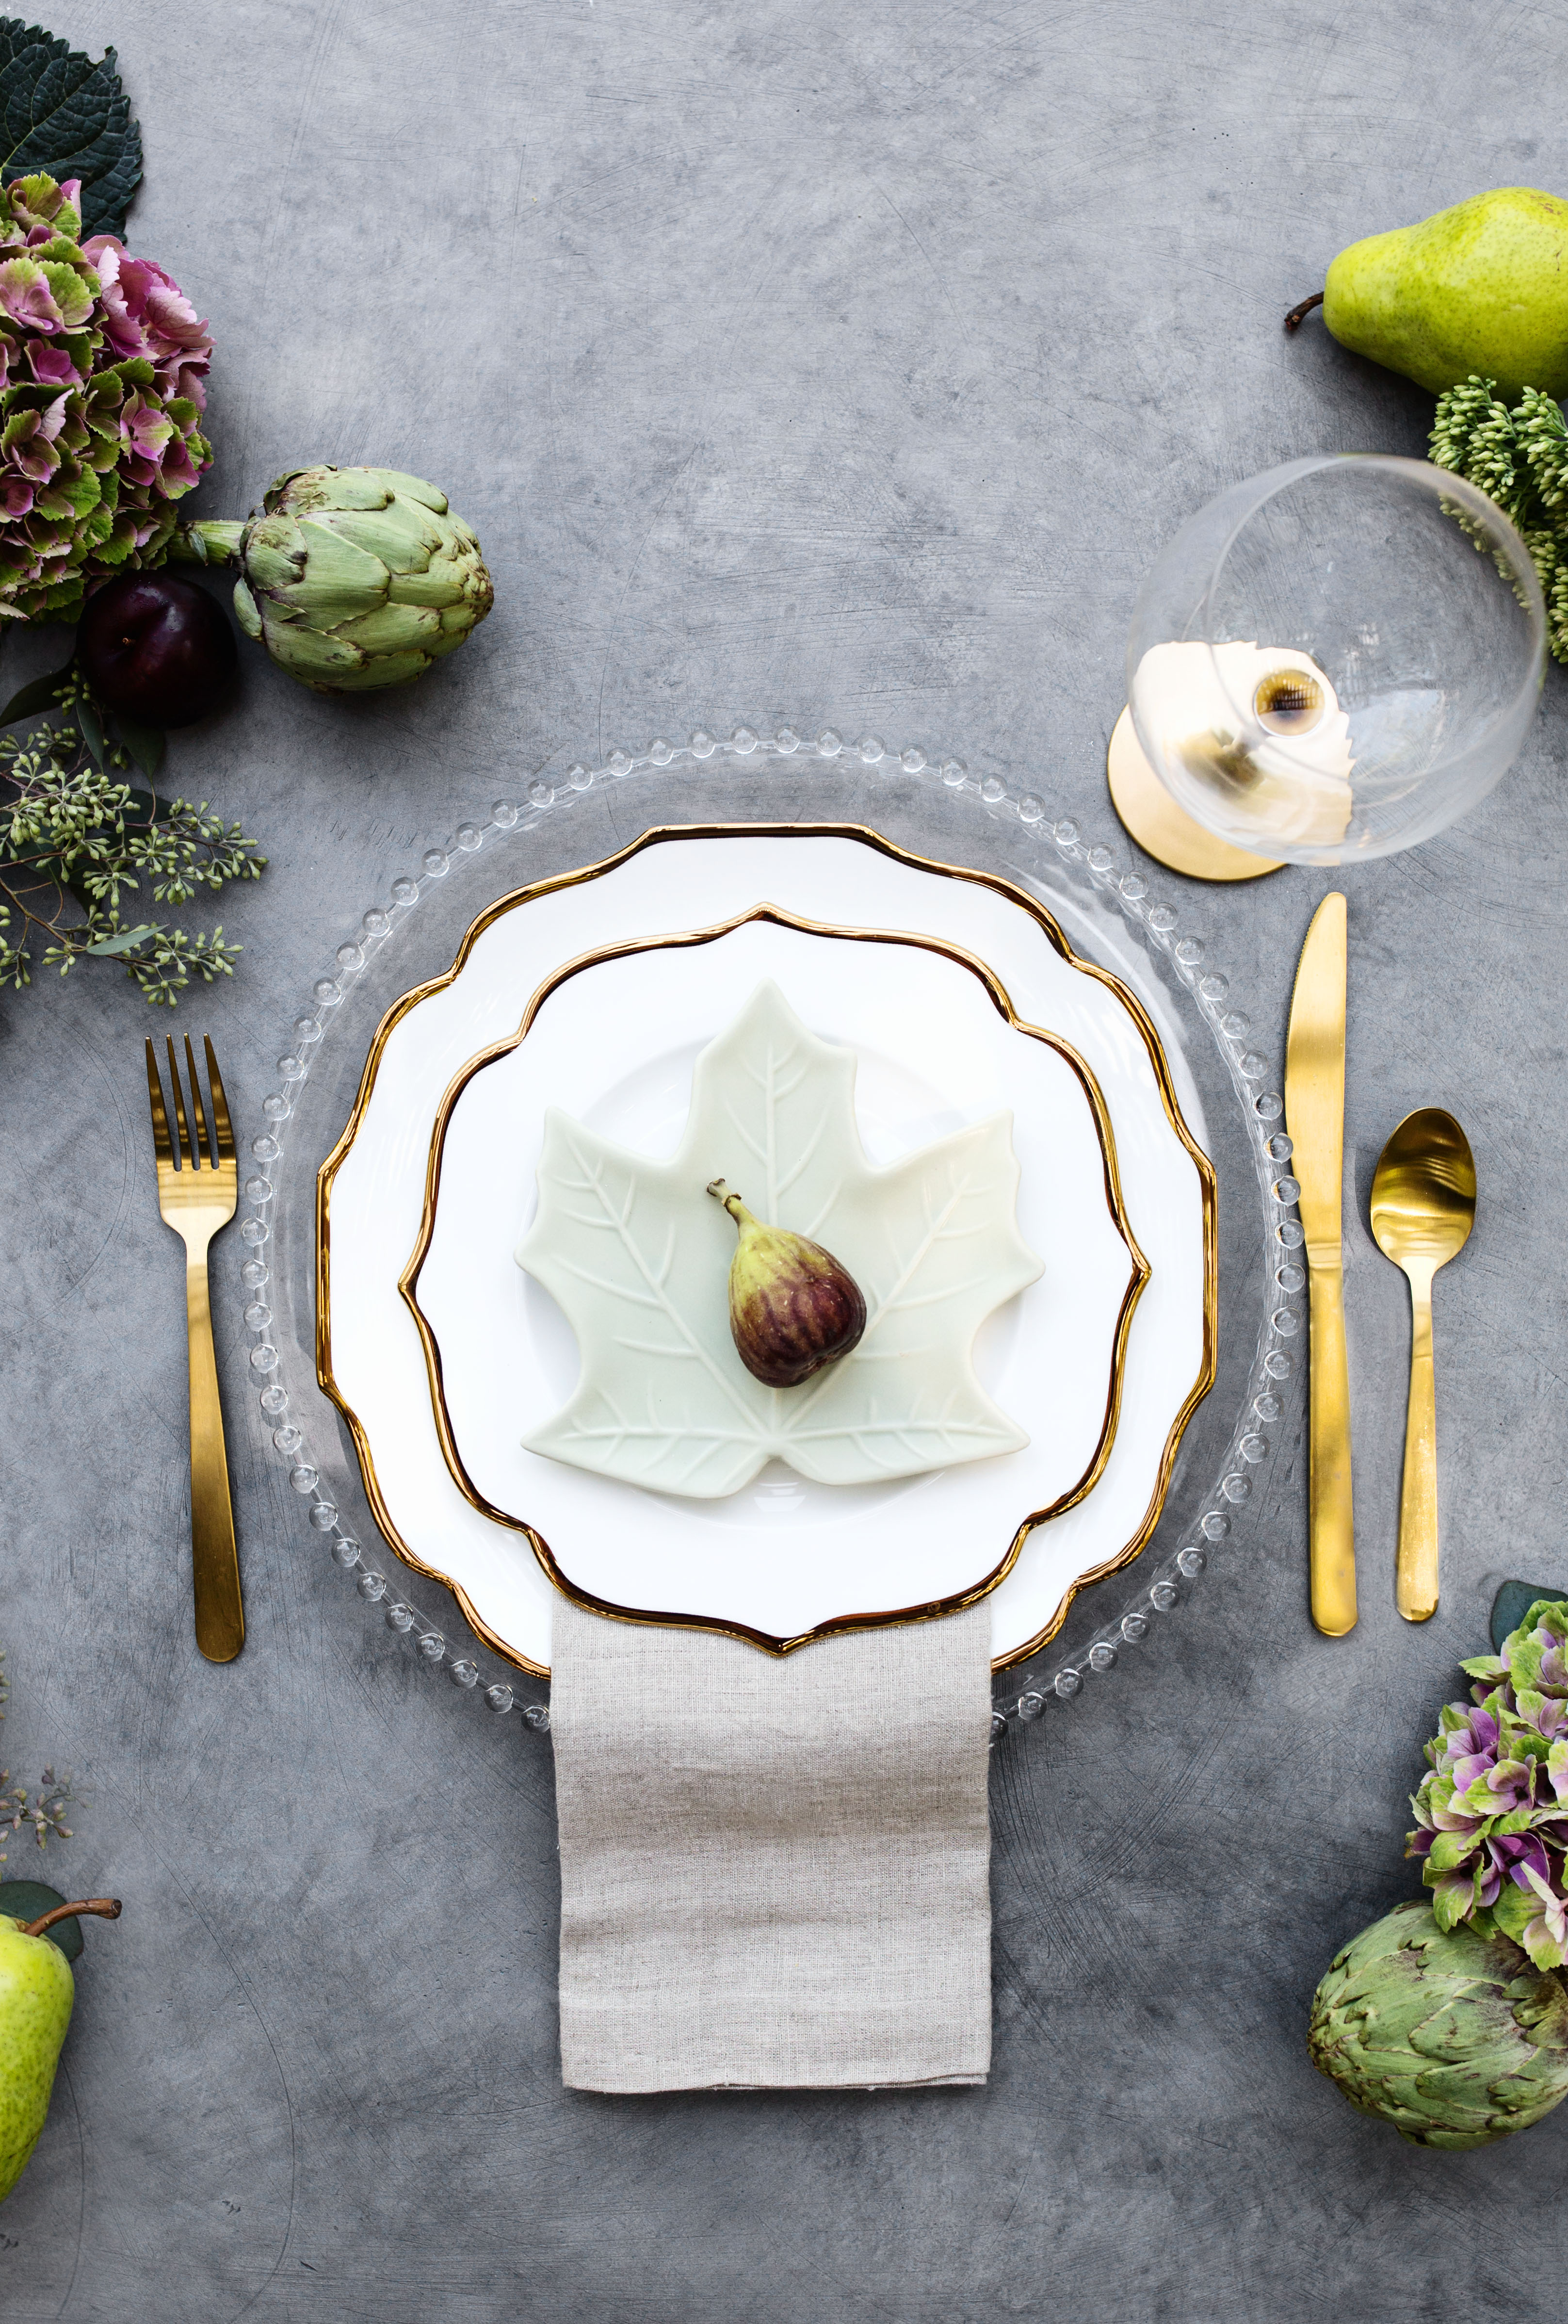 How to Use Fall Produce for Table Decor